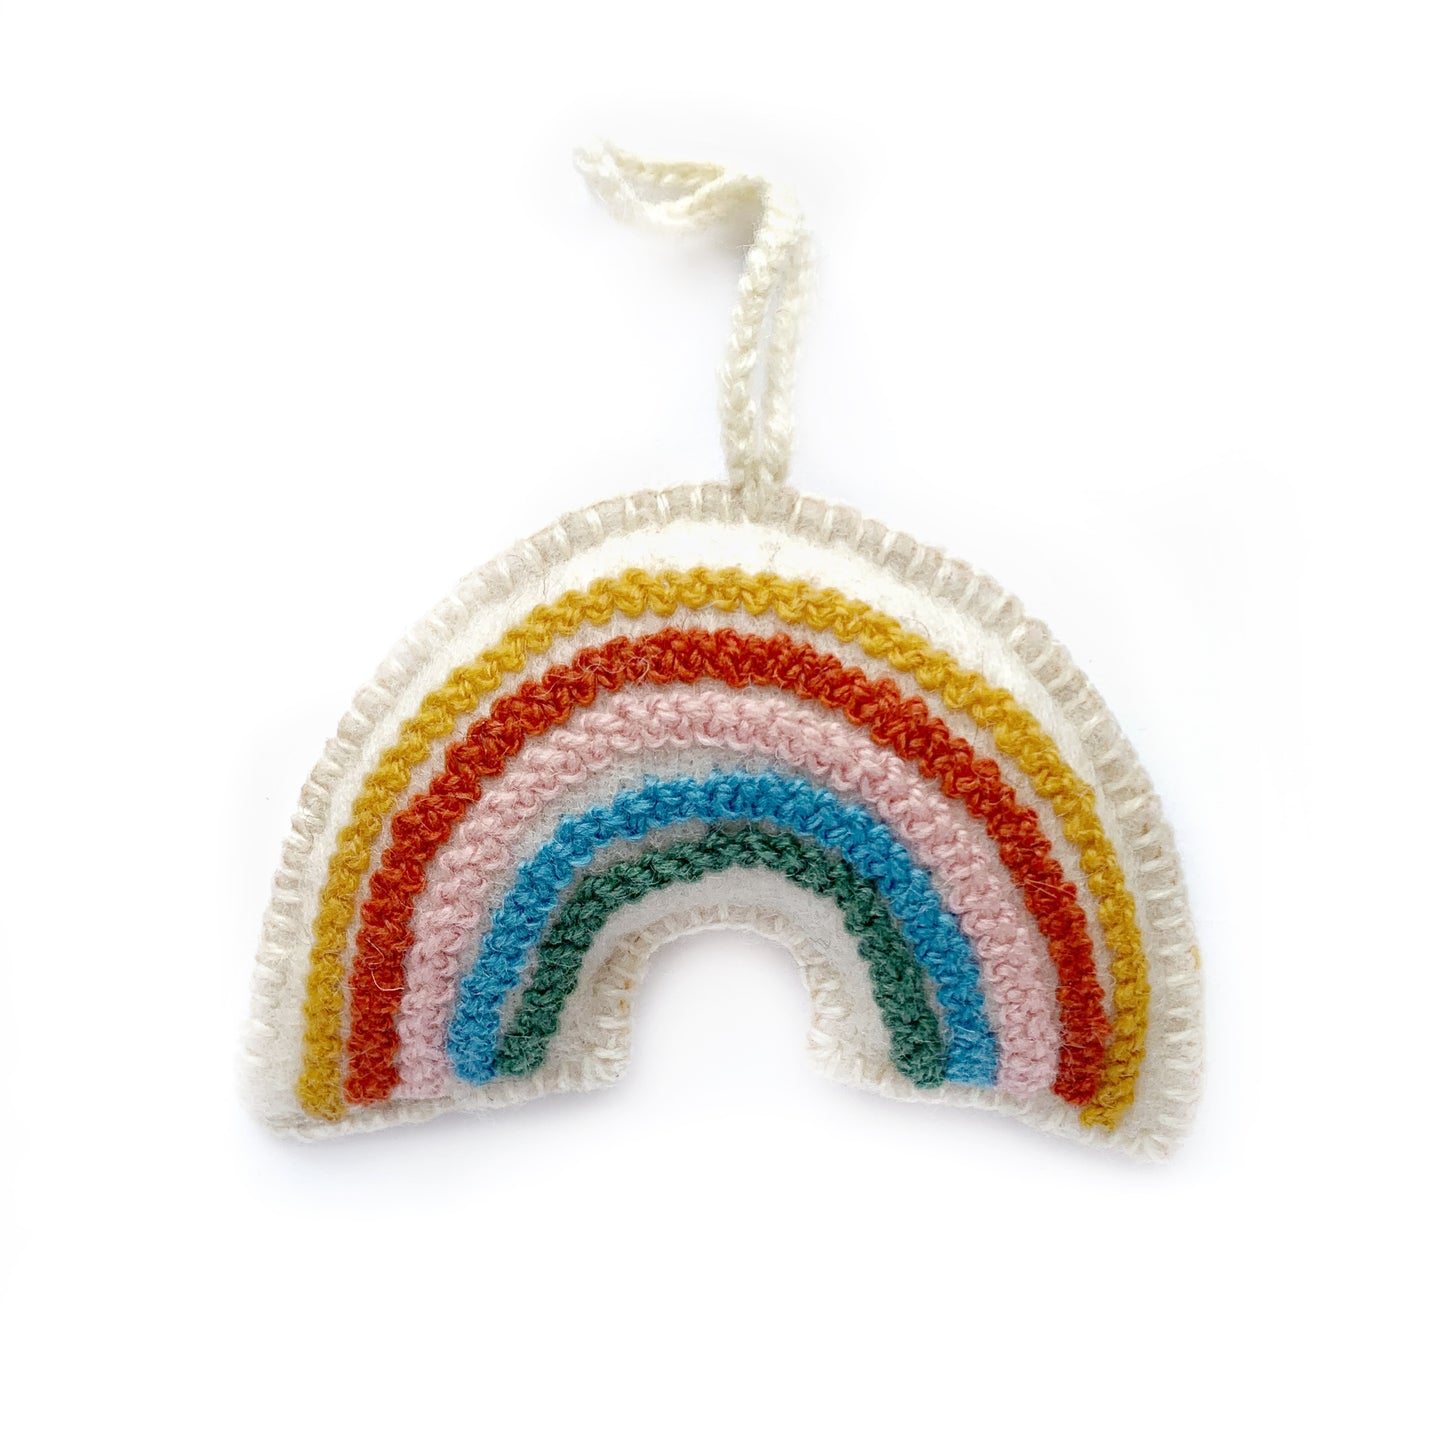 Rainbow Embroidered Knit Wool Ornament